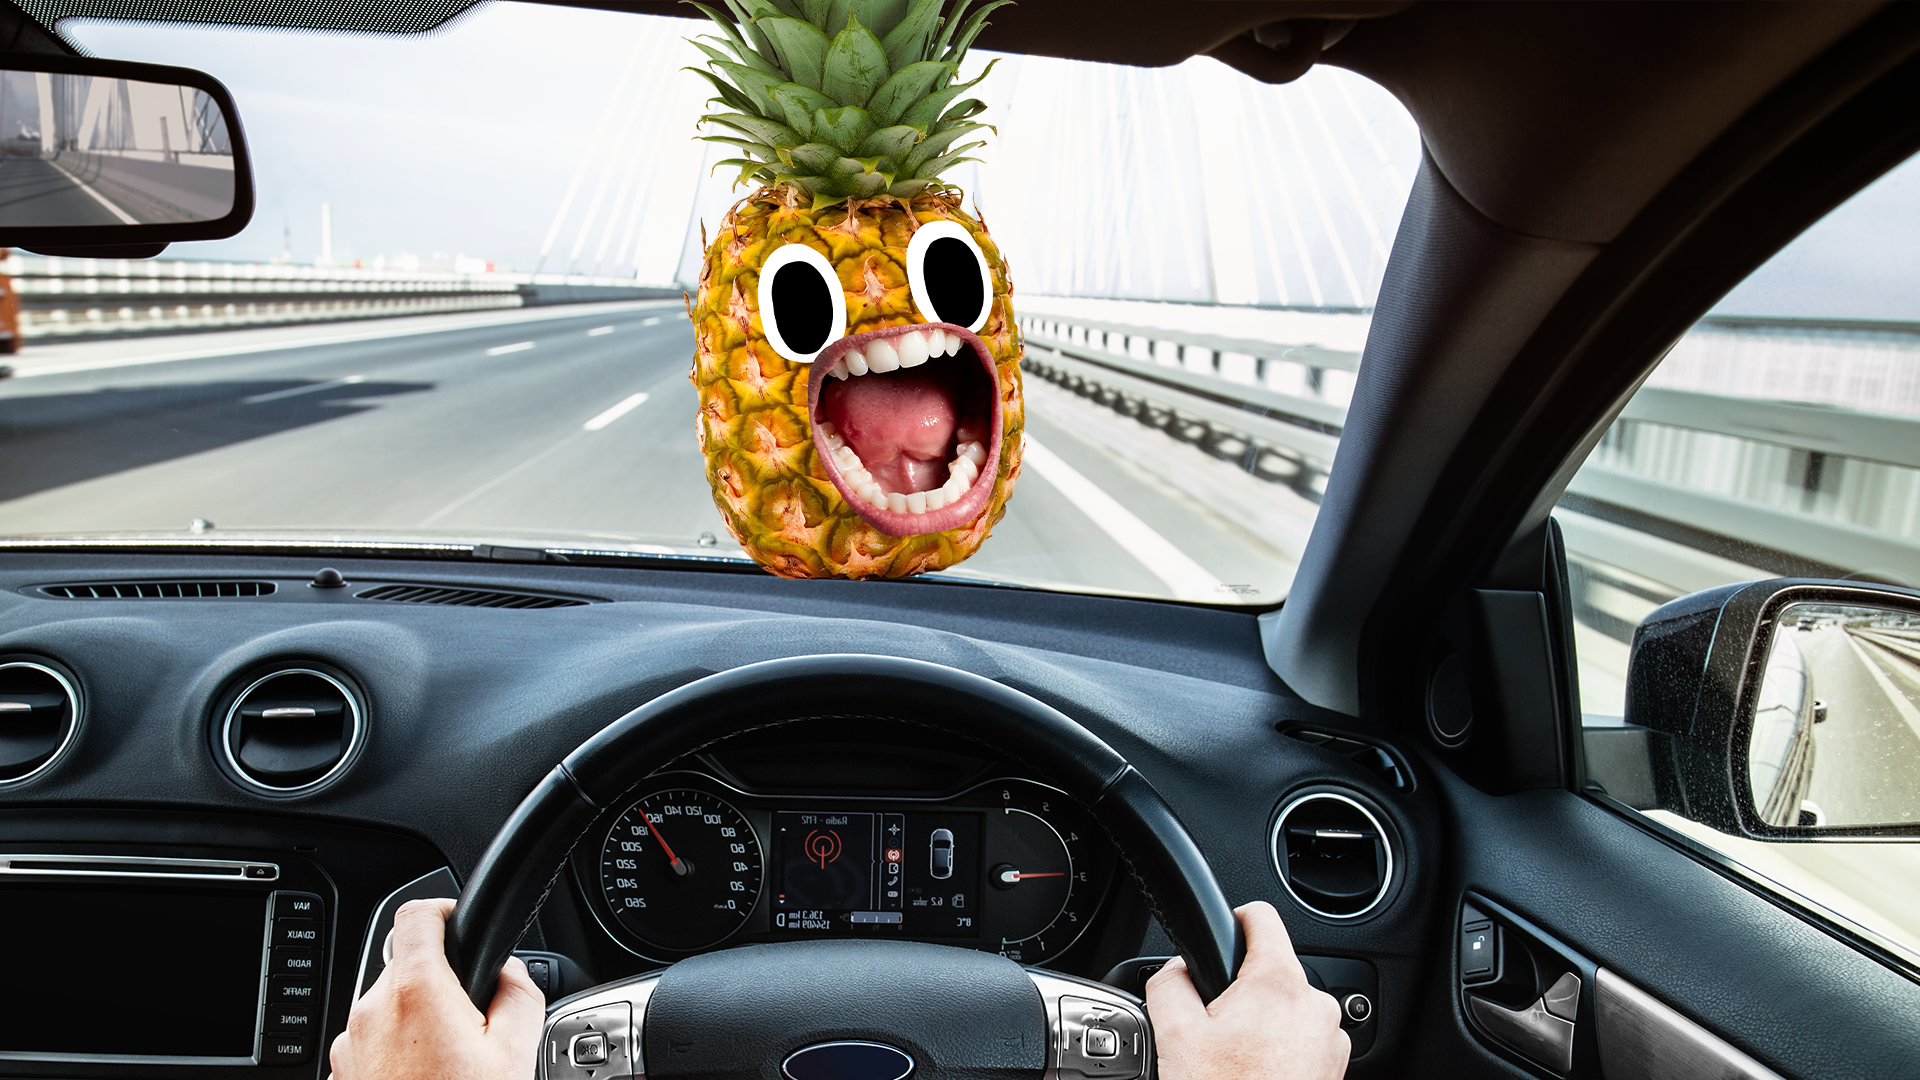 Someone driving with screaming pineapple